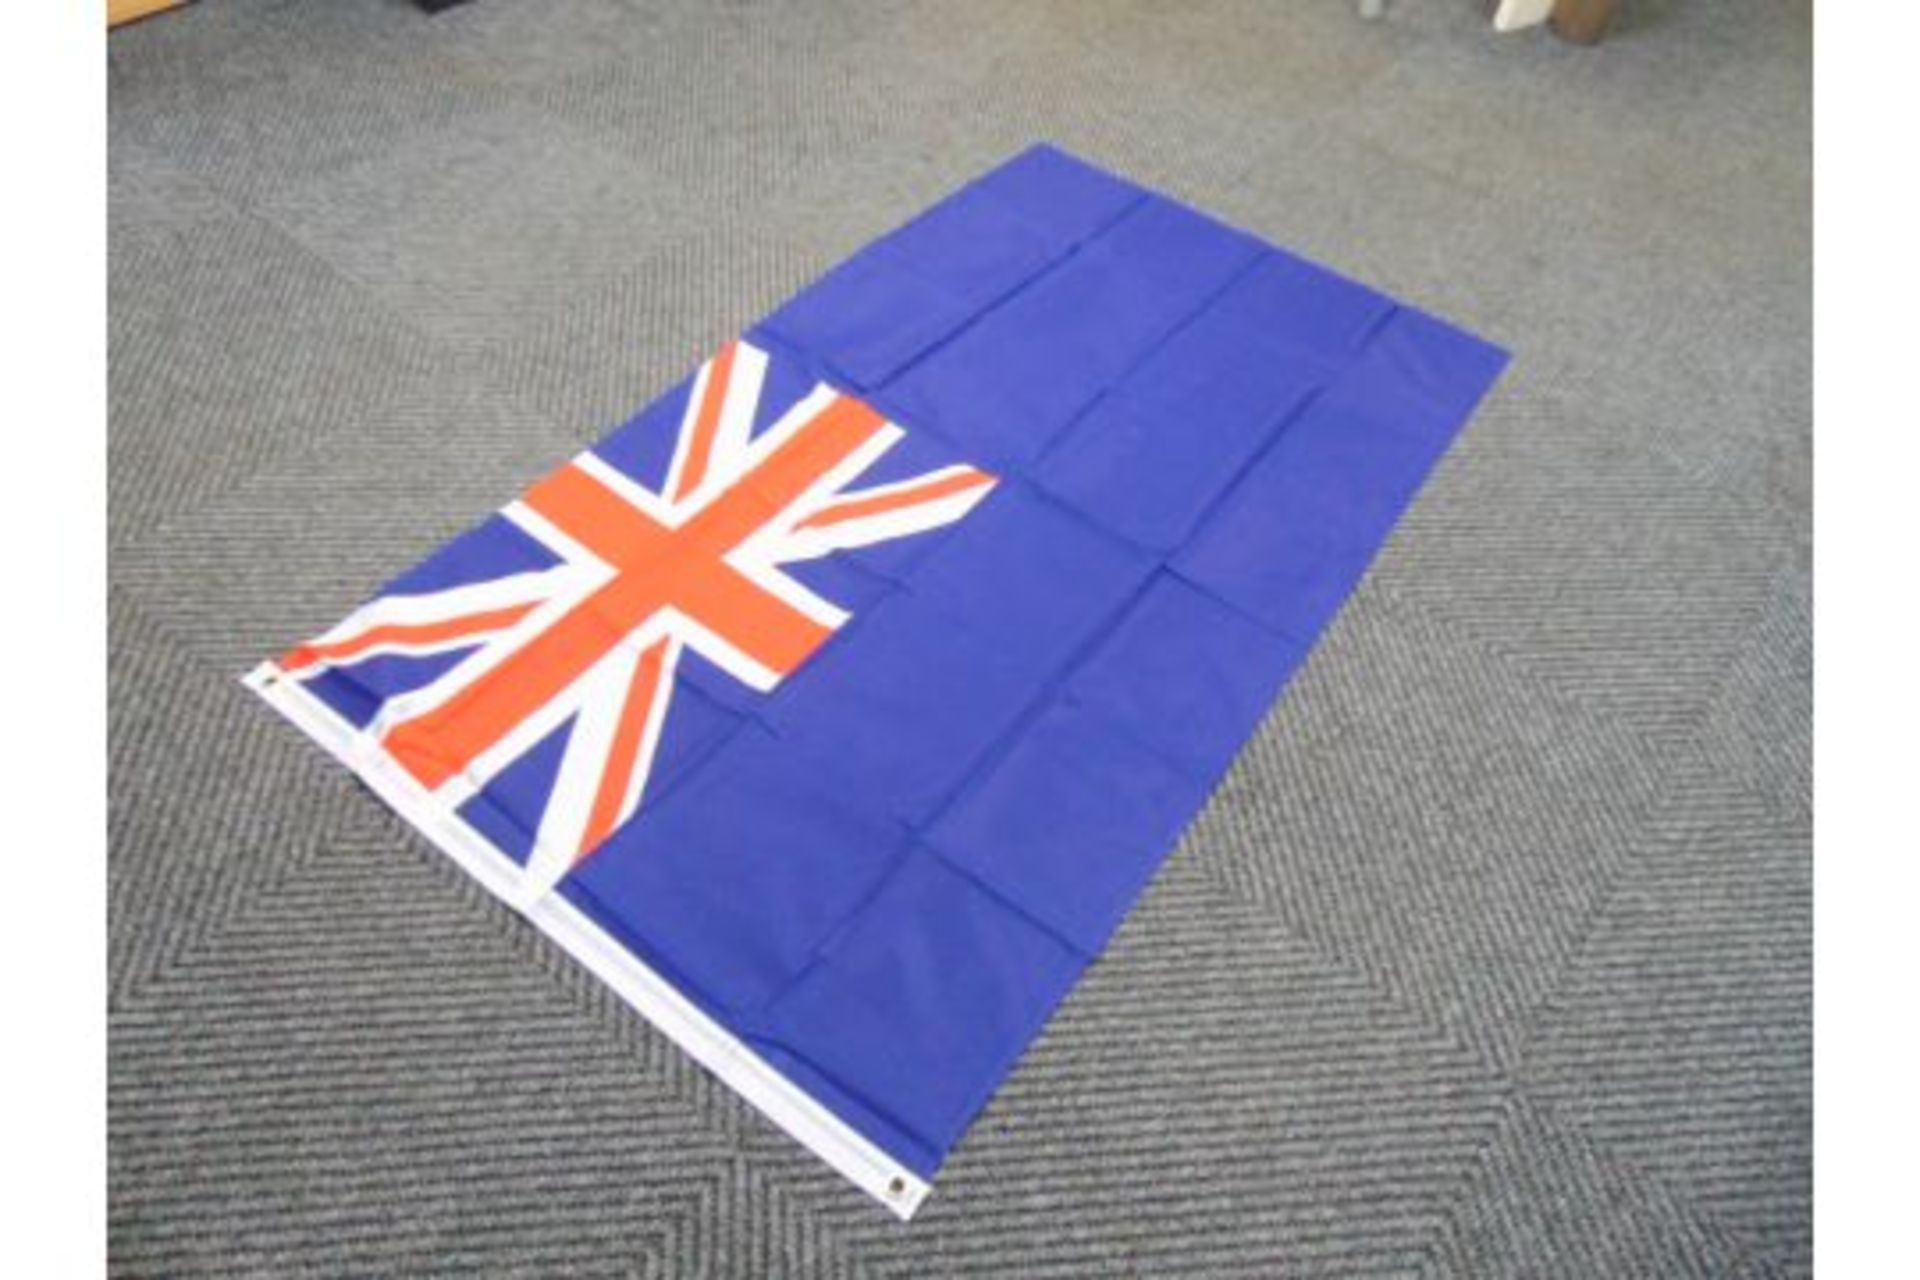 Blue Ensign Flag - 5ft x 3ft with Metal Eyelets. - Image 5 of 5